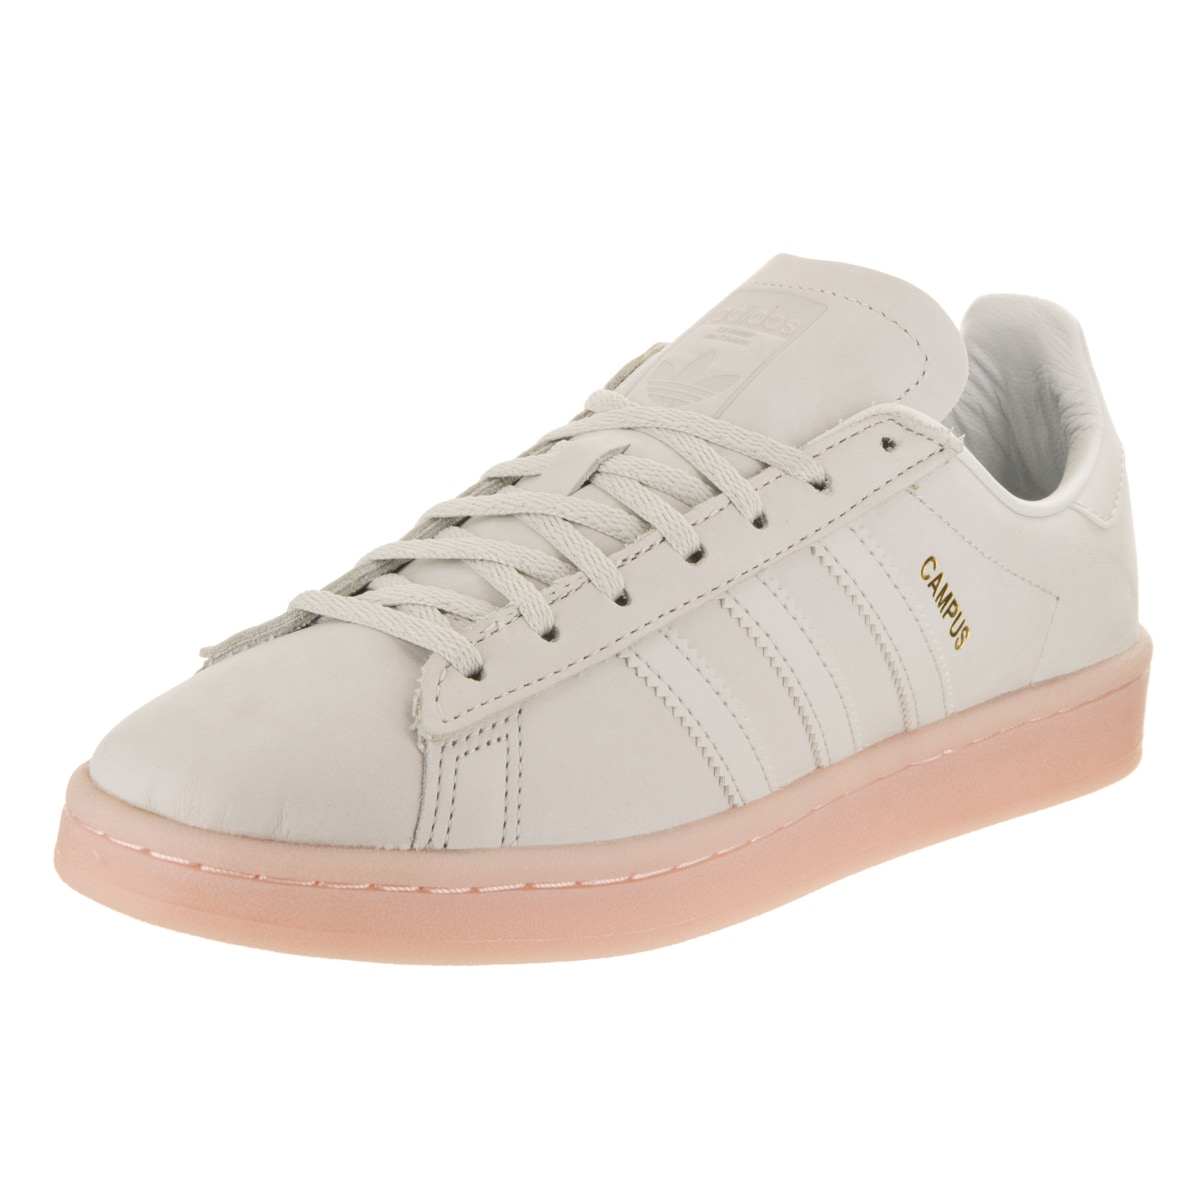 adidas women's campus shoes